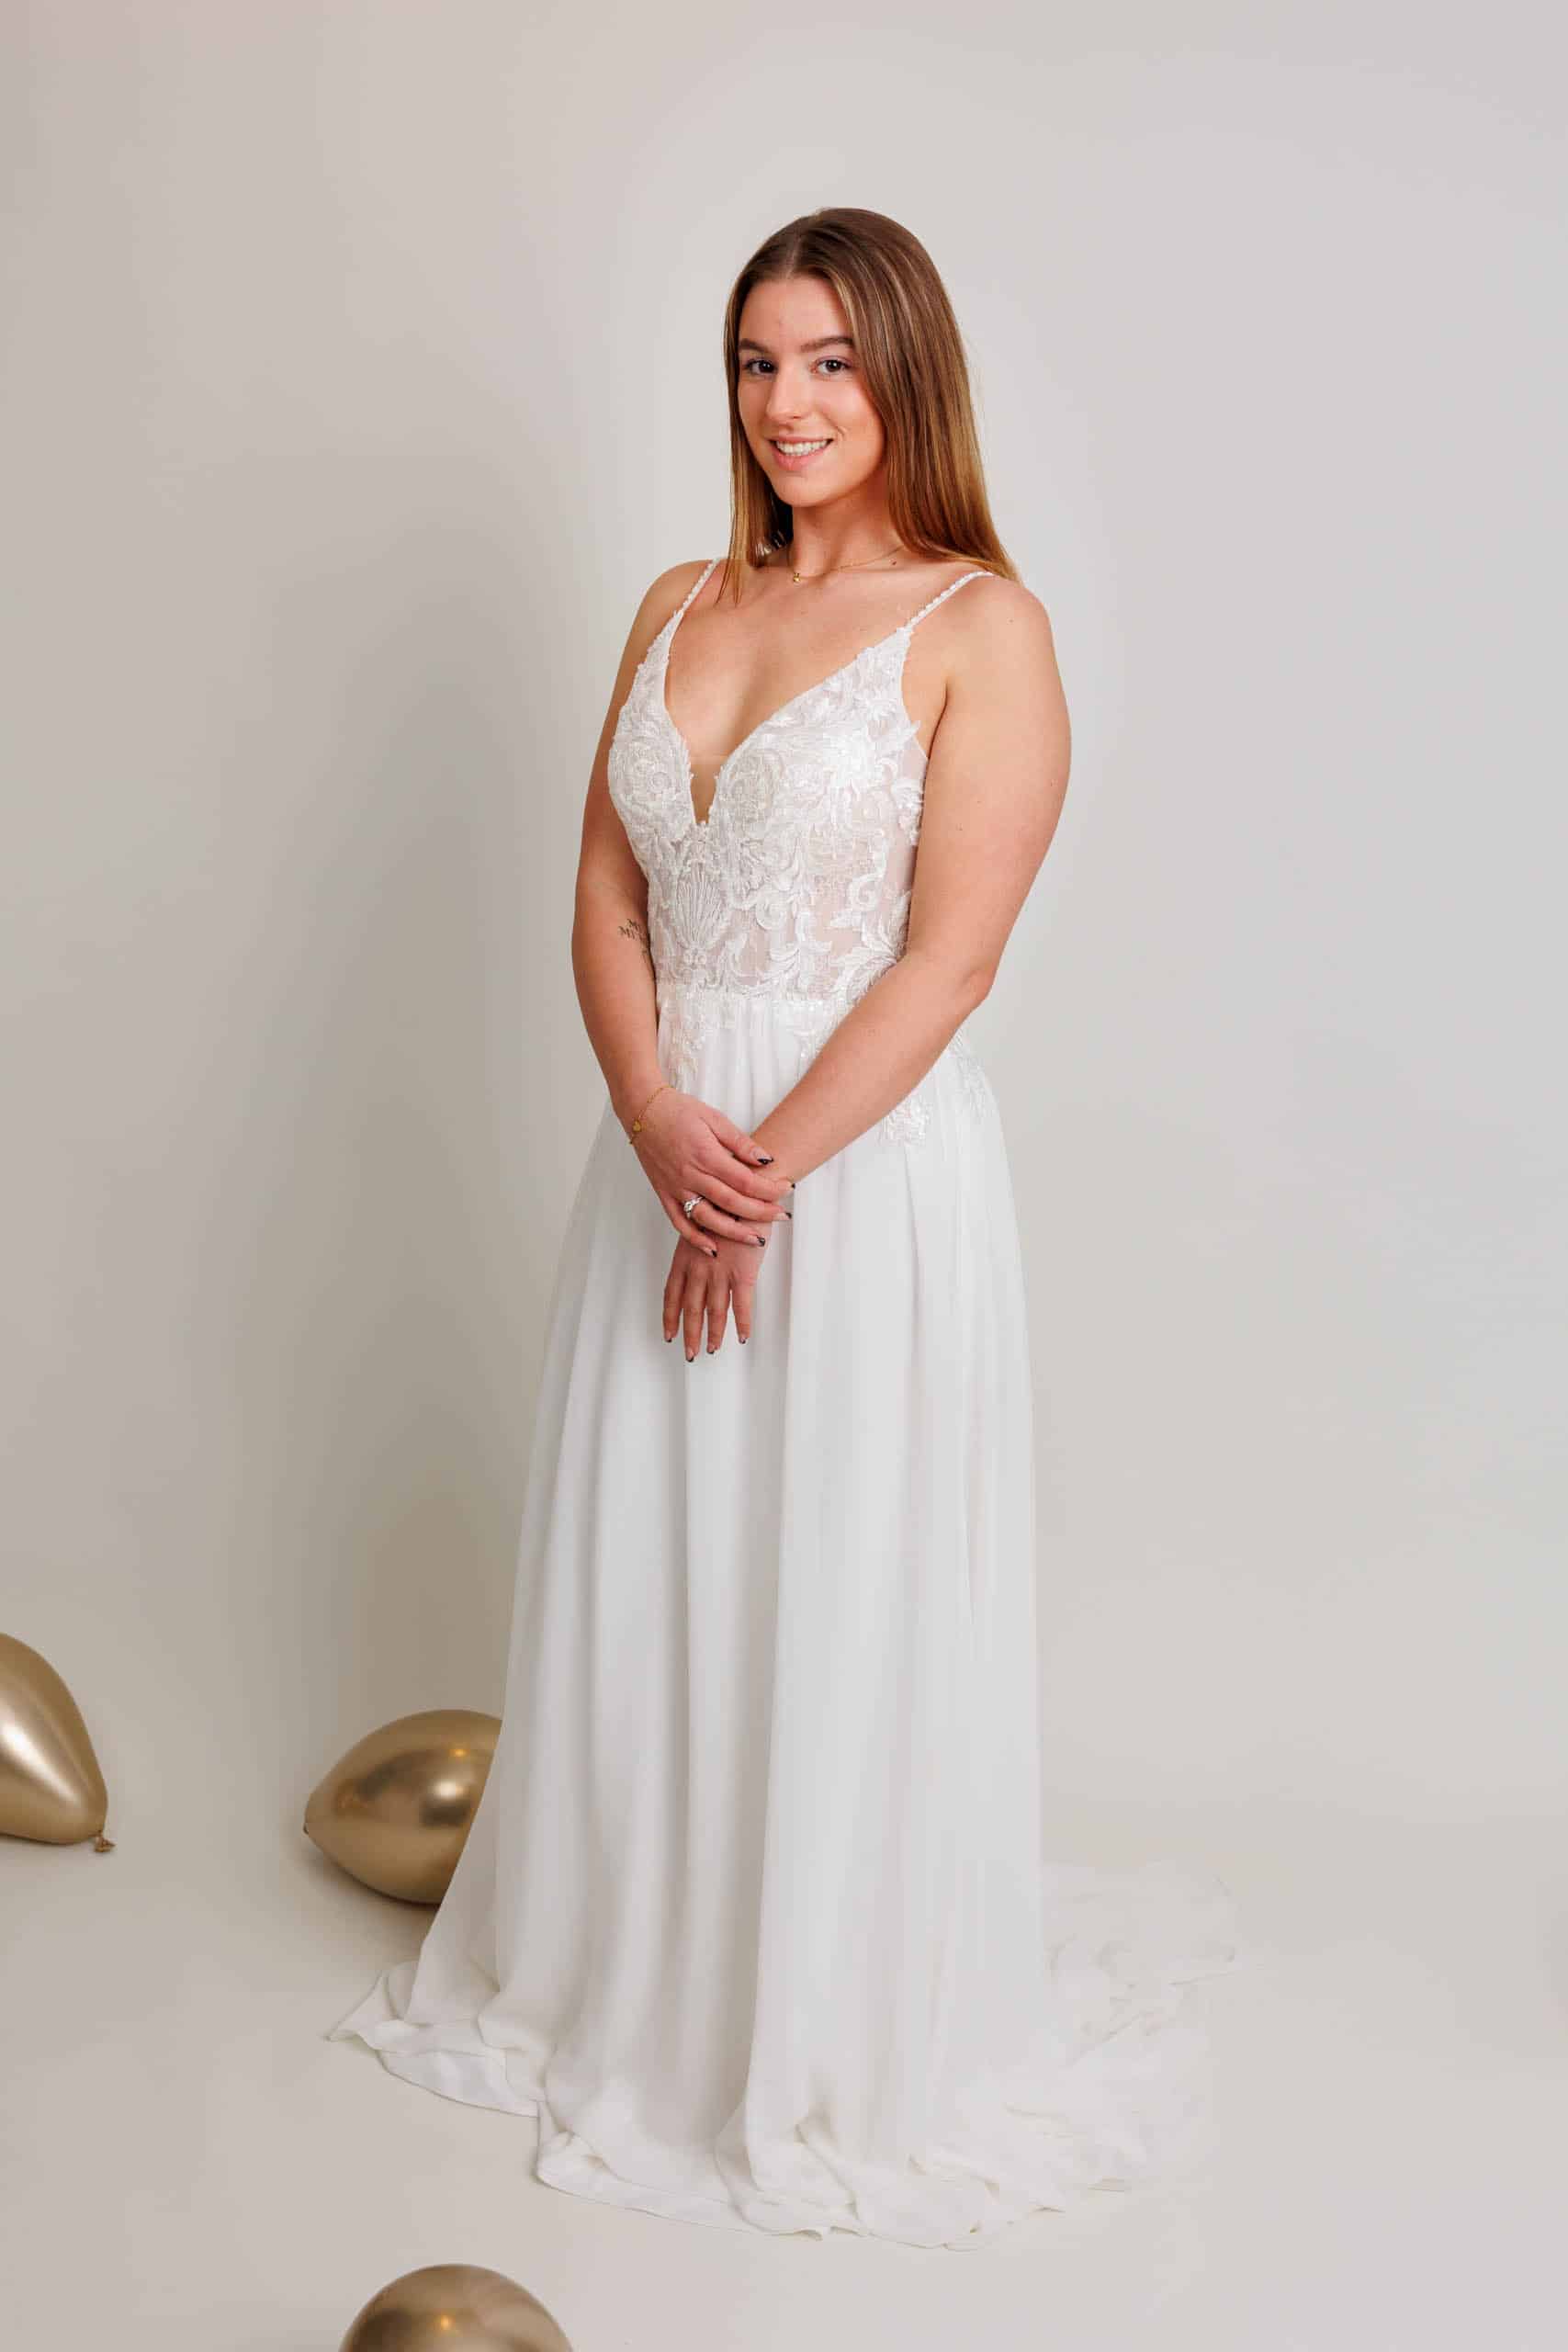 A woman in a white wedding dress poses with gold balloons while trying on wedding dresses.